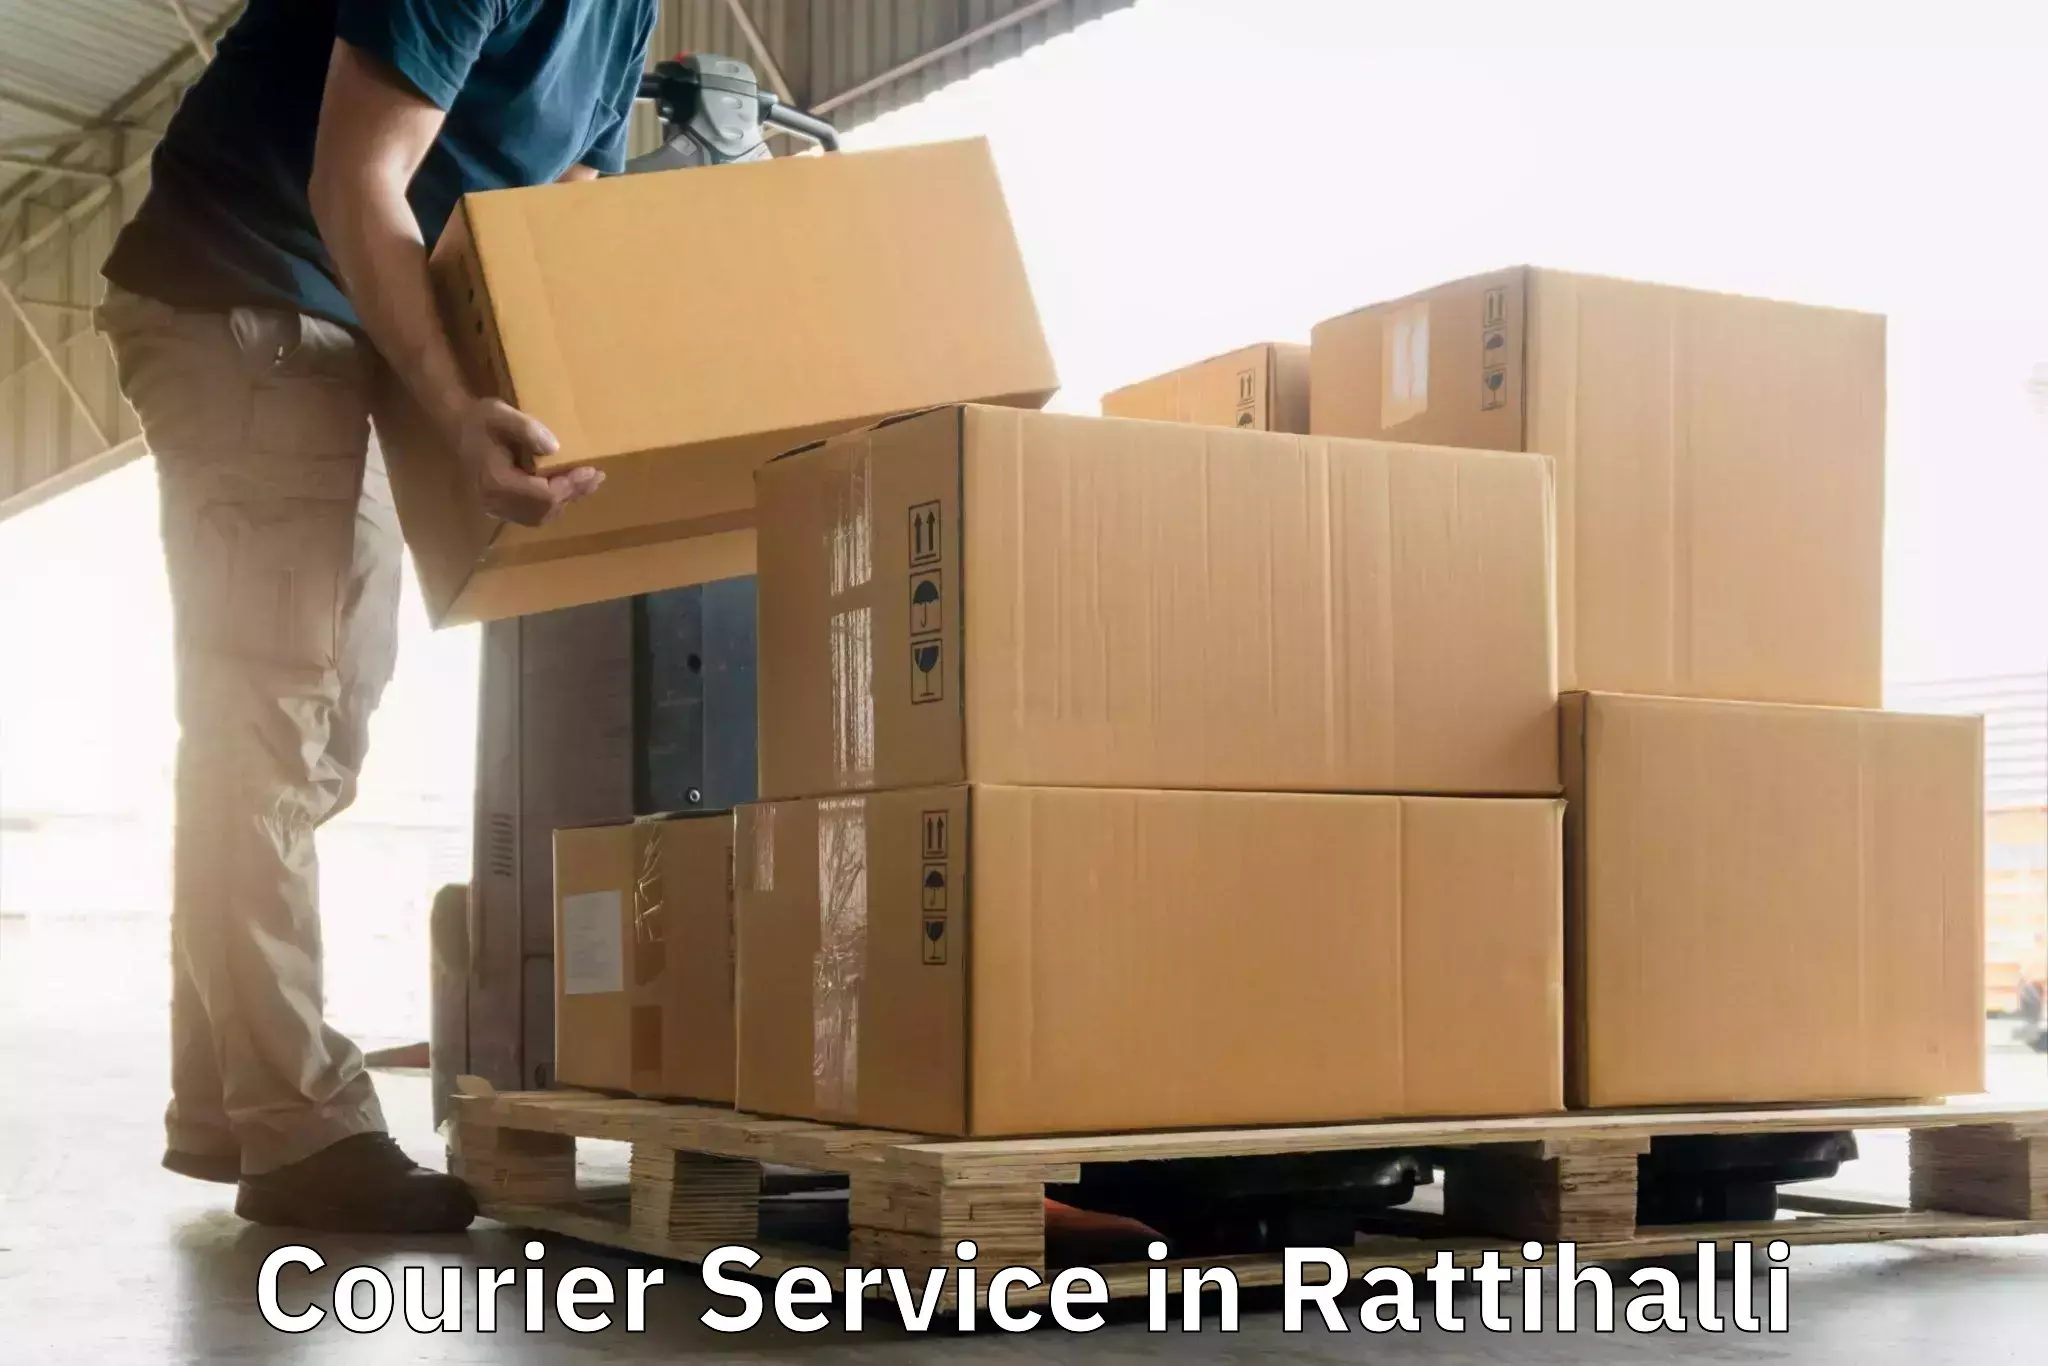 End-to-end delivery in Rattihalli